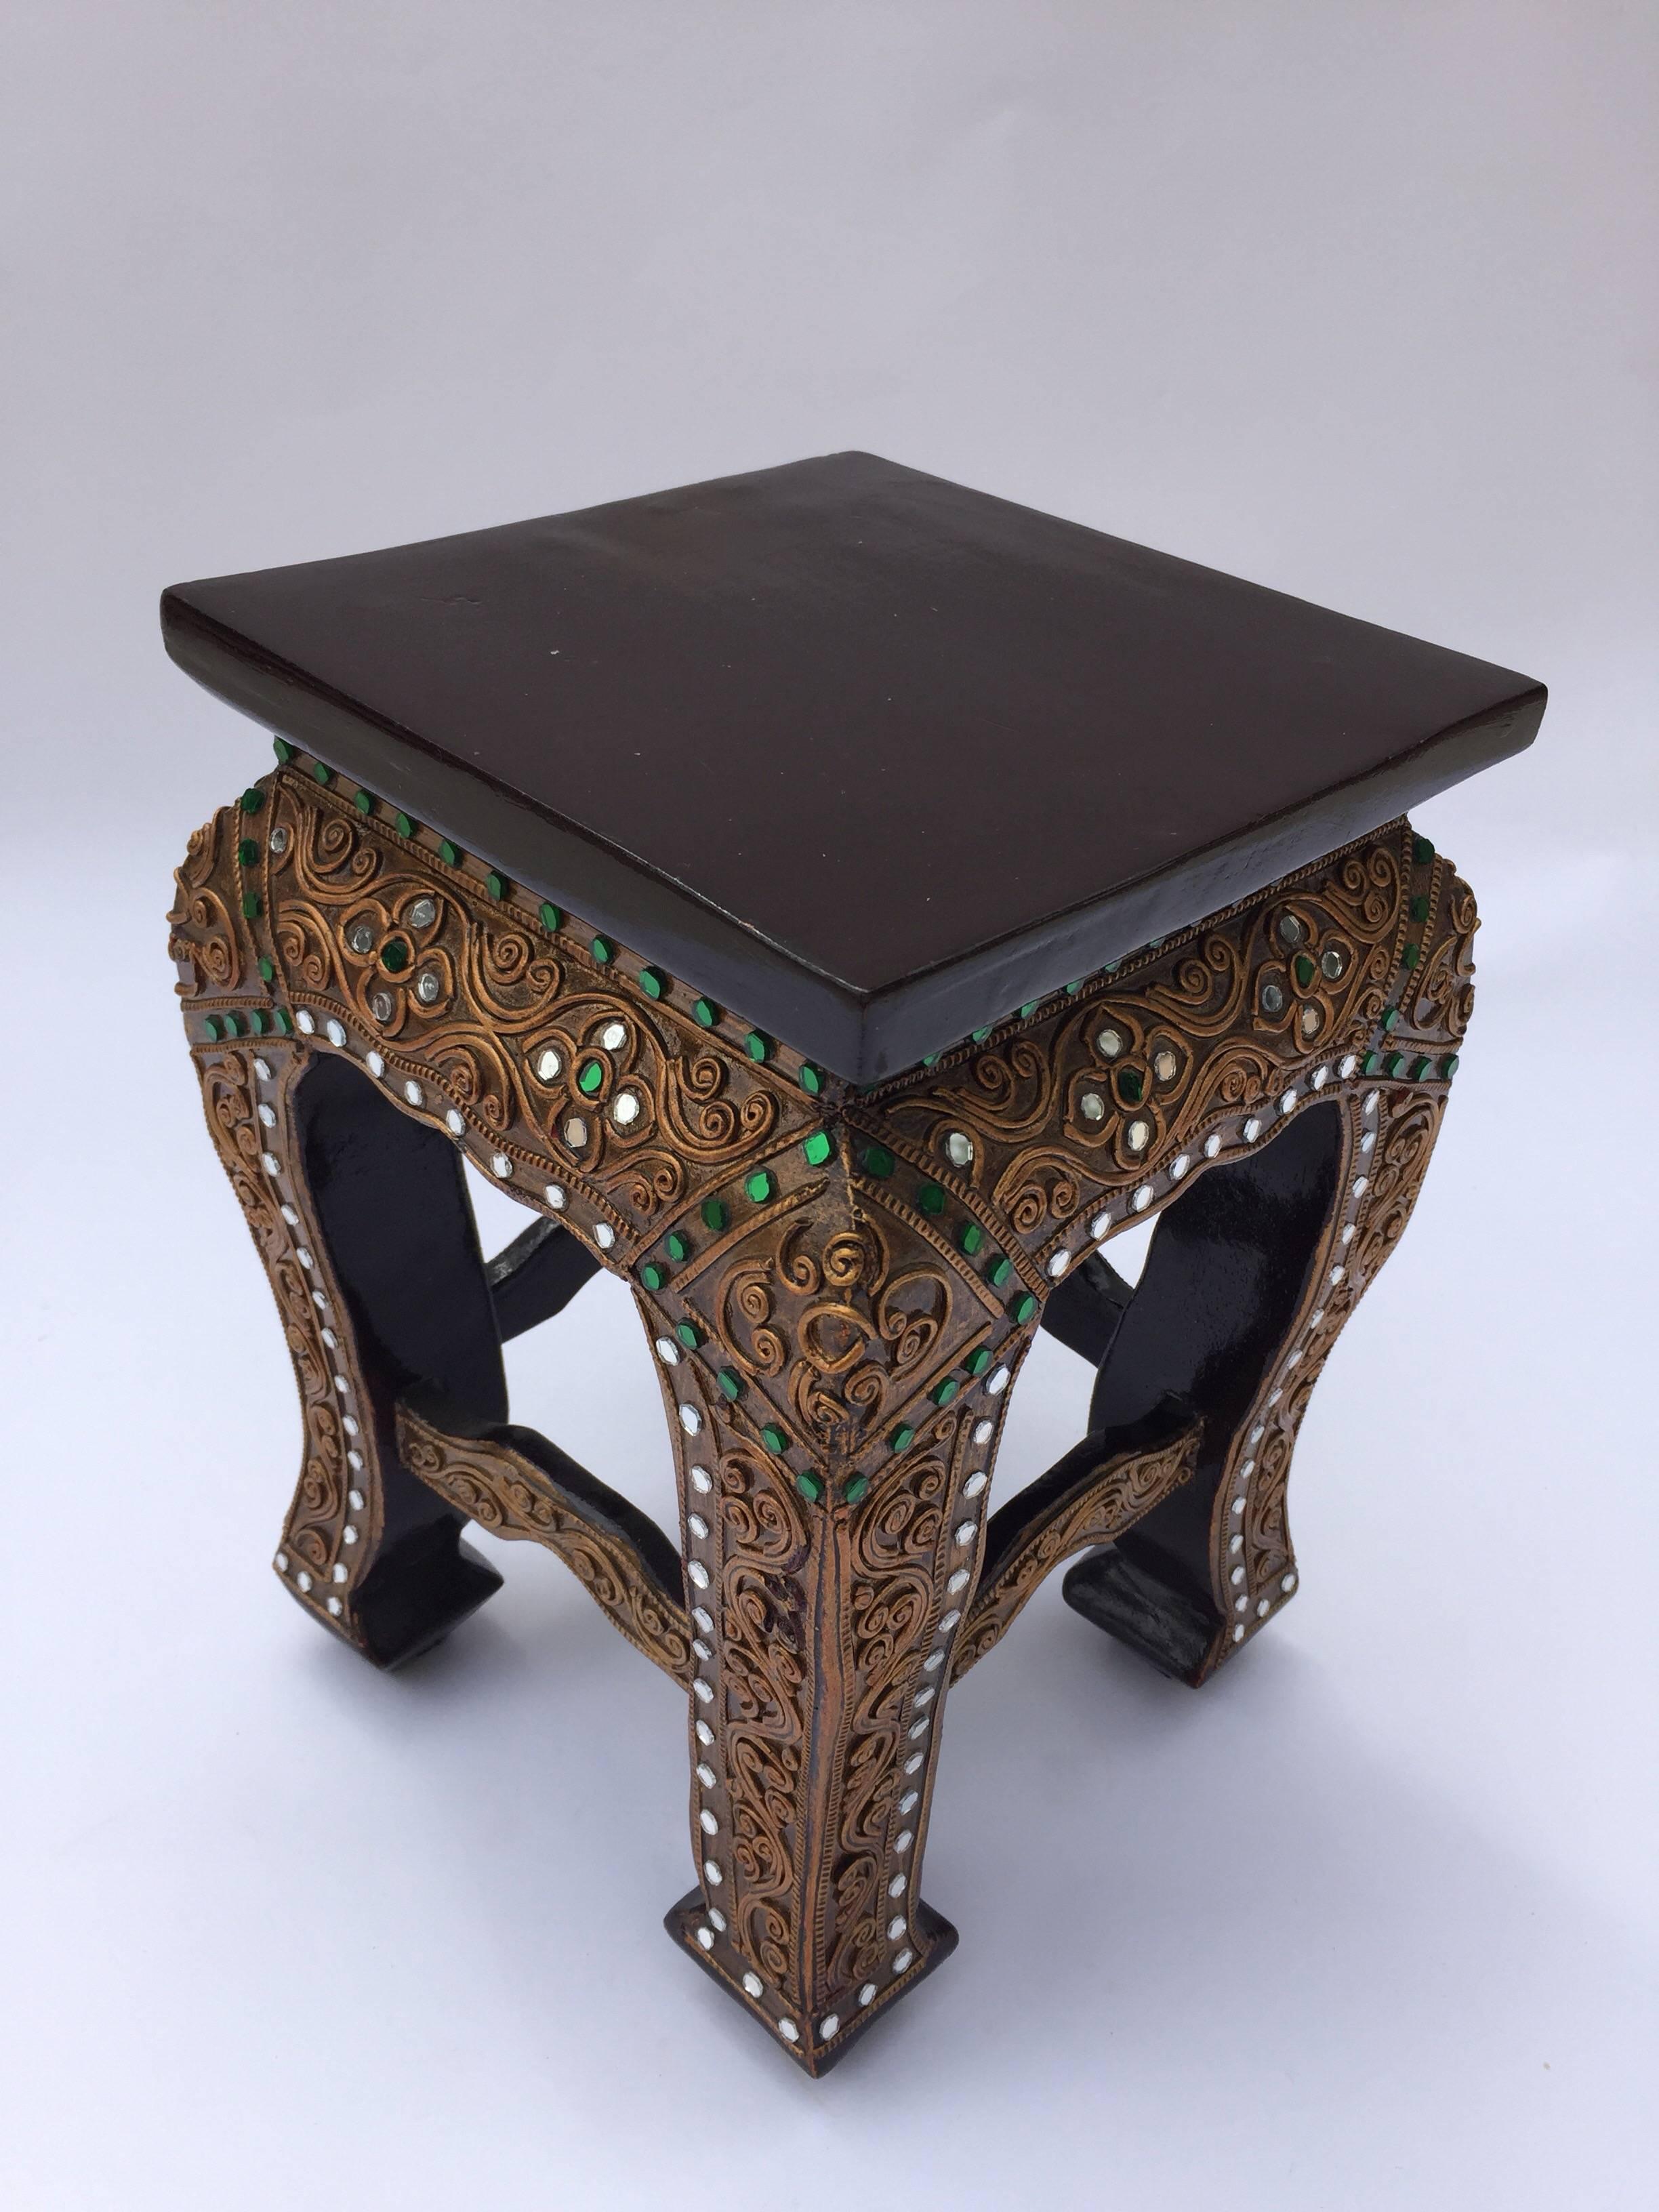 South East Asian brown lacquered wood gilded temple square low table stand.
Burmese, Myanmar stand with curved legs decorated with green and clear glass mirrors overlaid.
Uses in temples as stand for deities statues or offering bowls.
Probably from